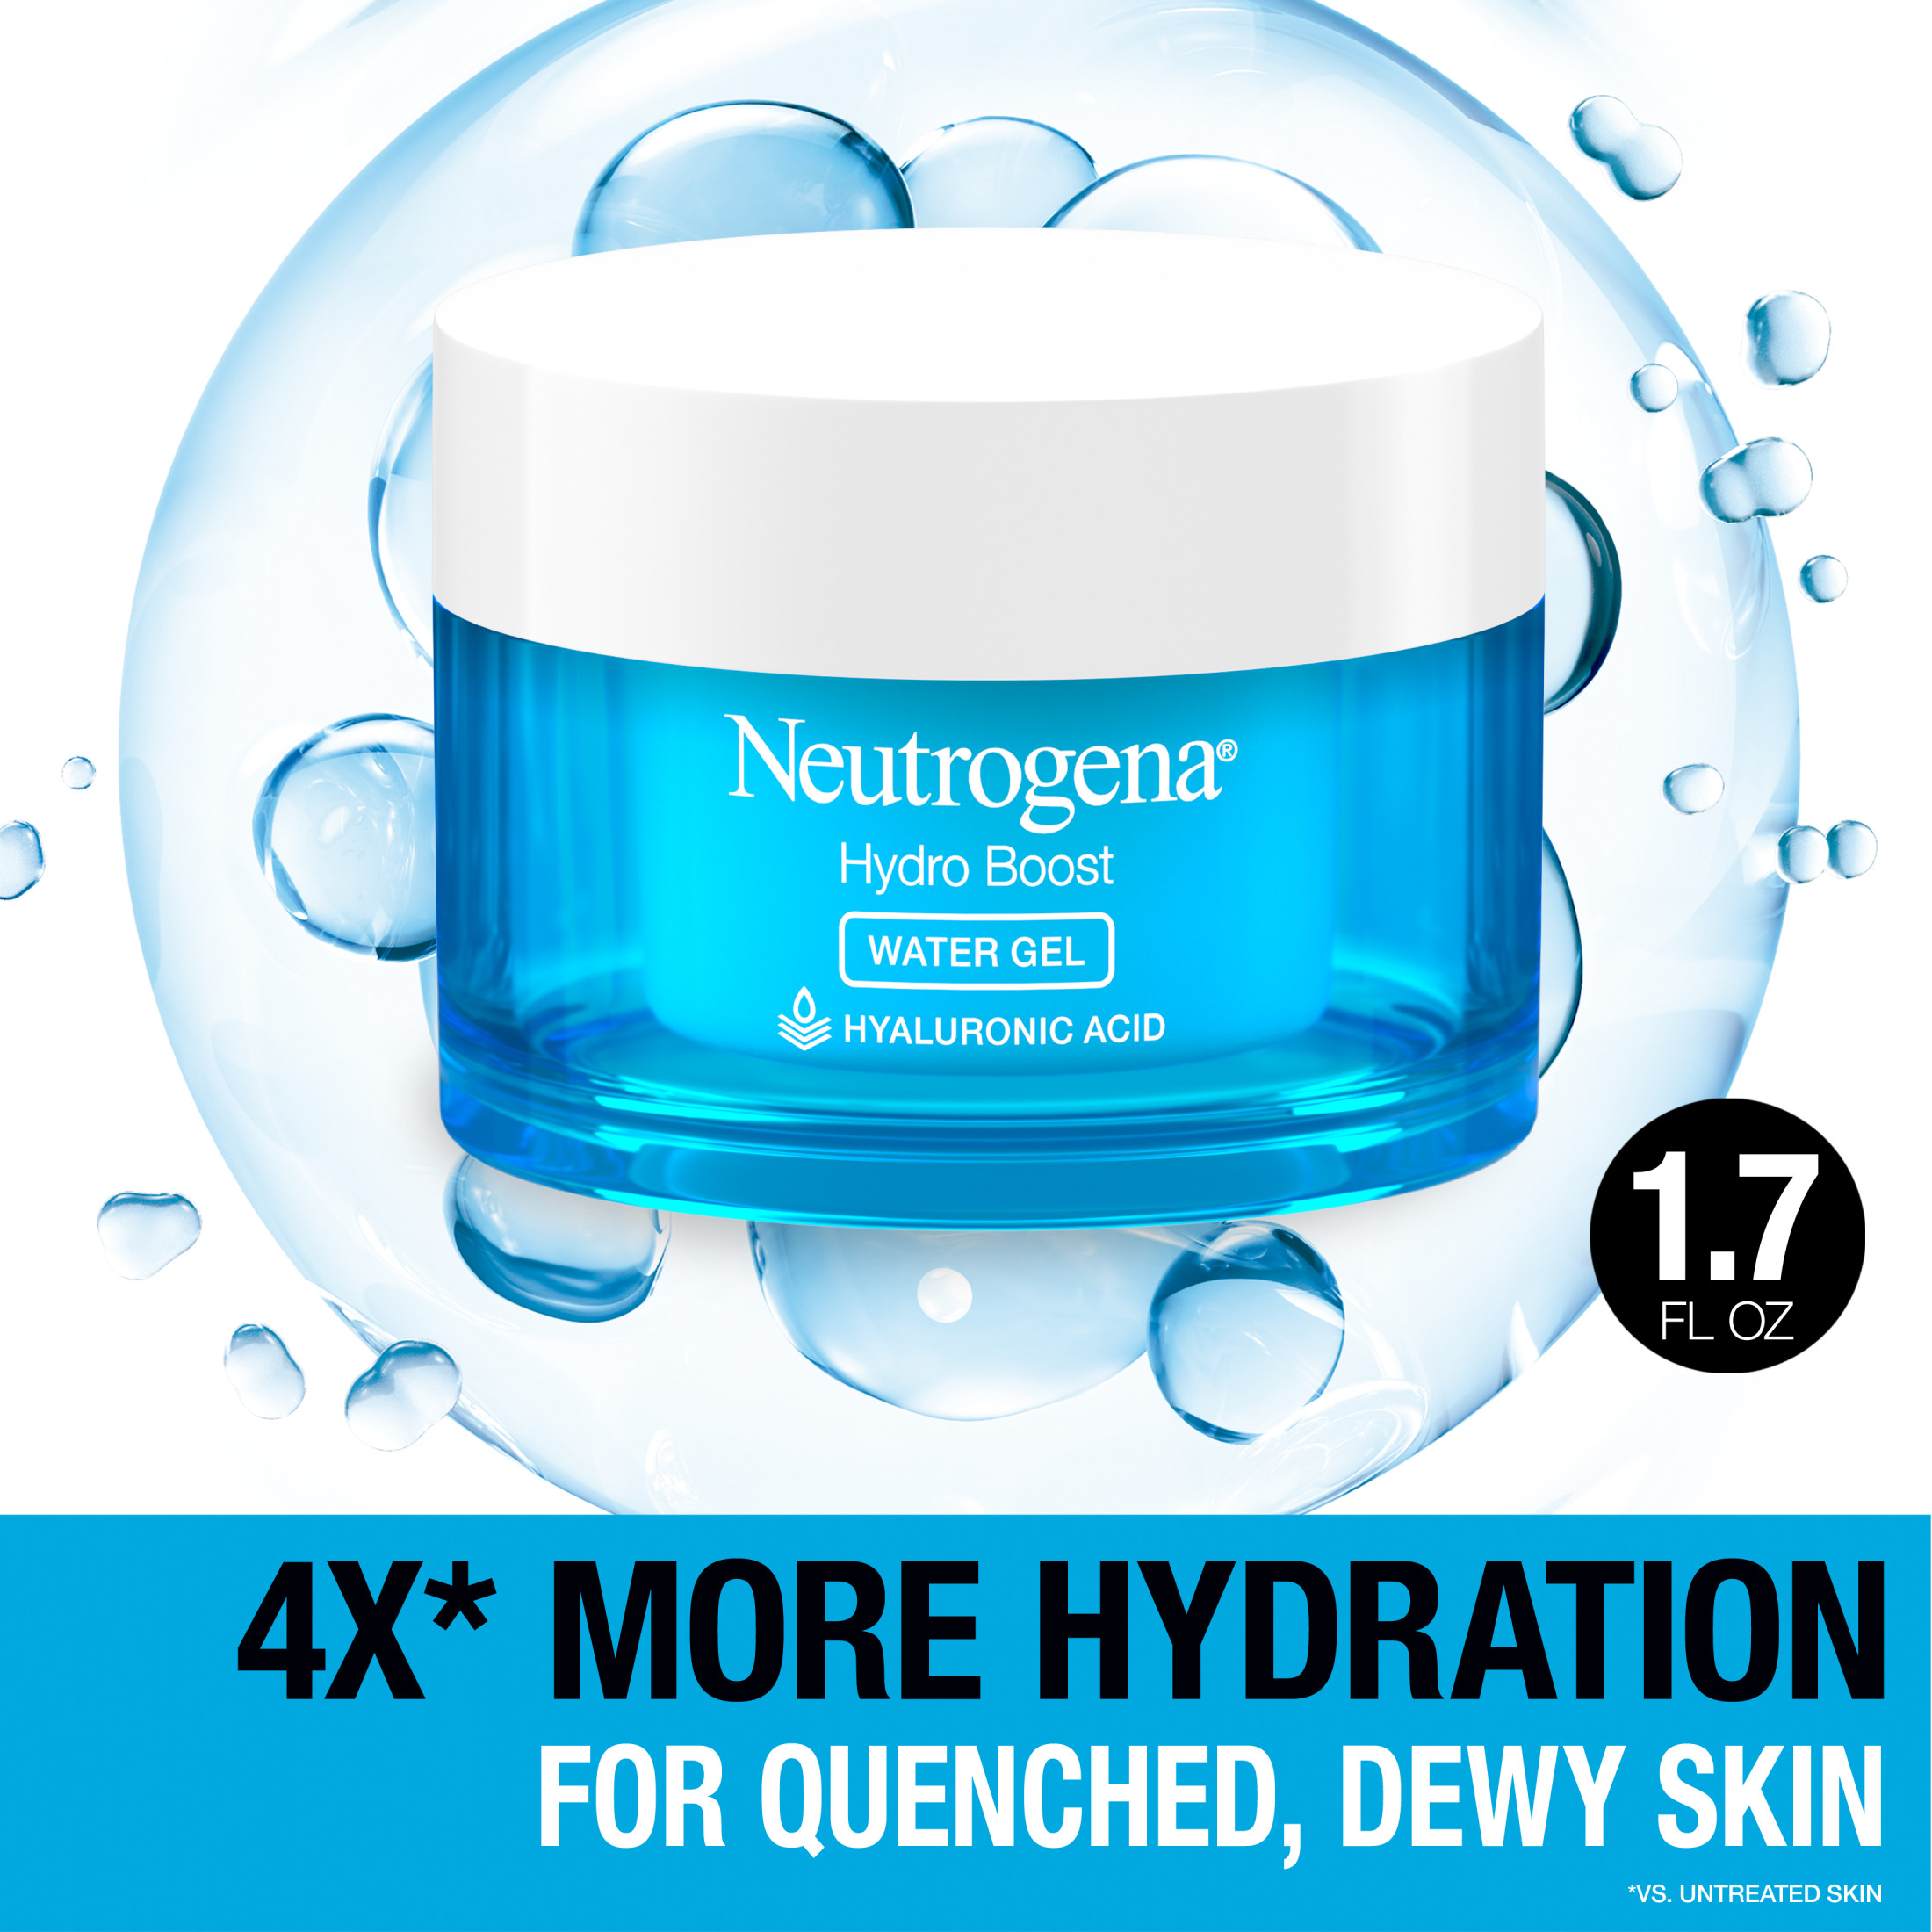 Neutrogena Hydro Boost Water Gel Face Moisturizer Lotion with Hyaluronic Acid, 1.7 oz - image 1 of 11